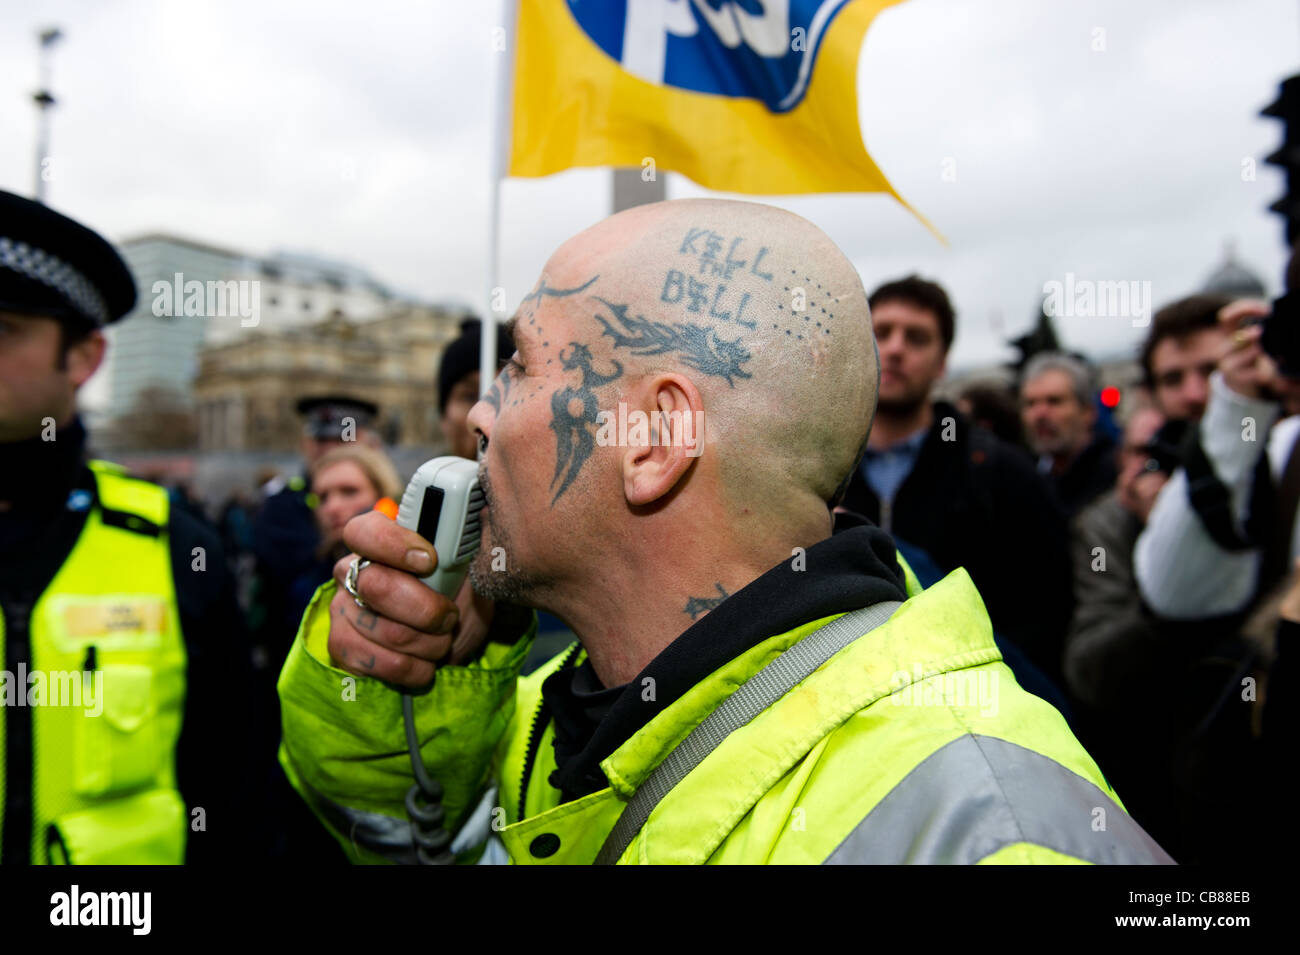 Male protester with bald tattooed head with 'Kill the Bill' speaks into microphone in an attempt to goad the police at protest. Stock Photo